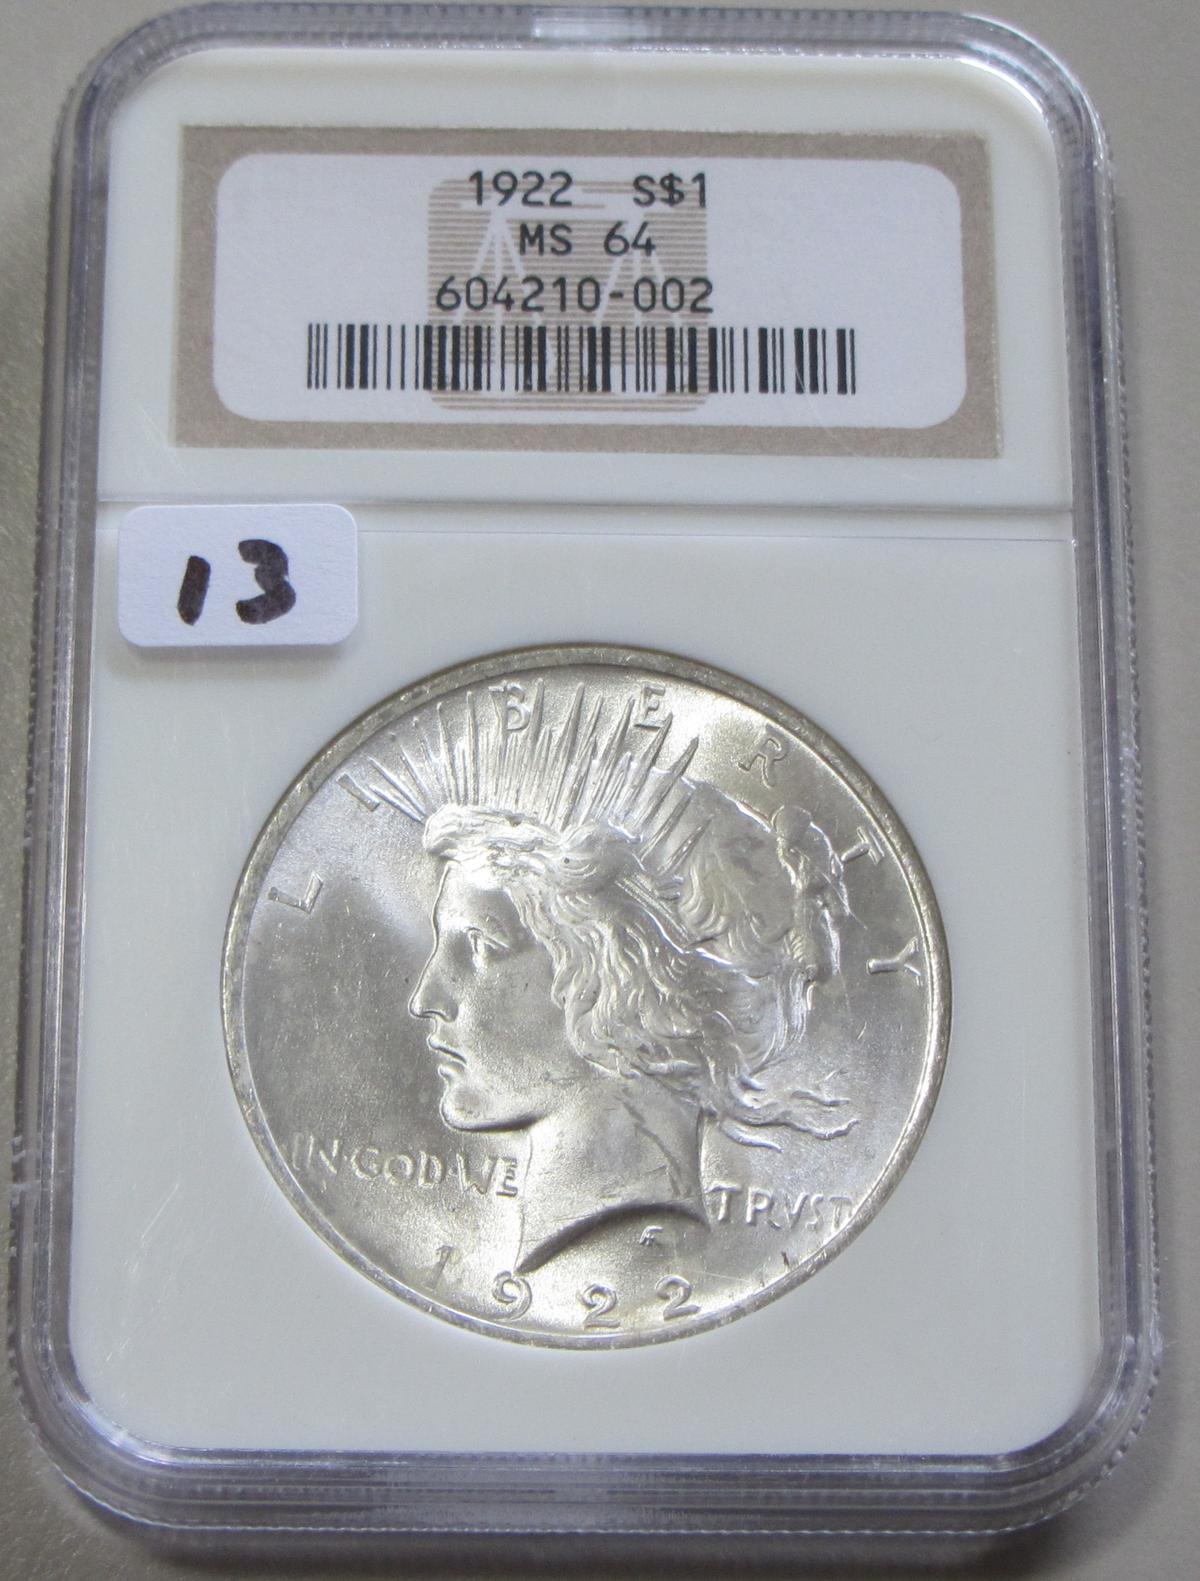 $1 1922 PEACE SILVER DOLLAR NGC MS 64